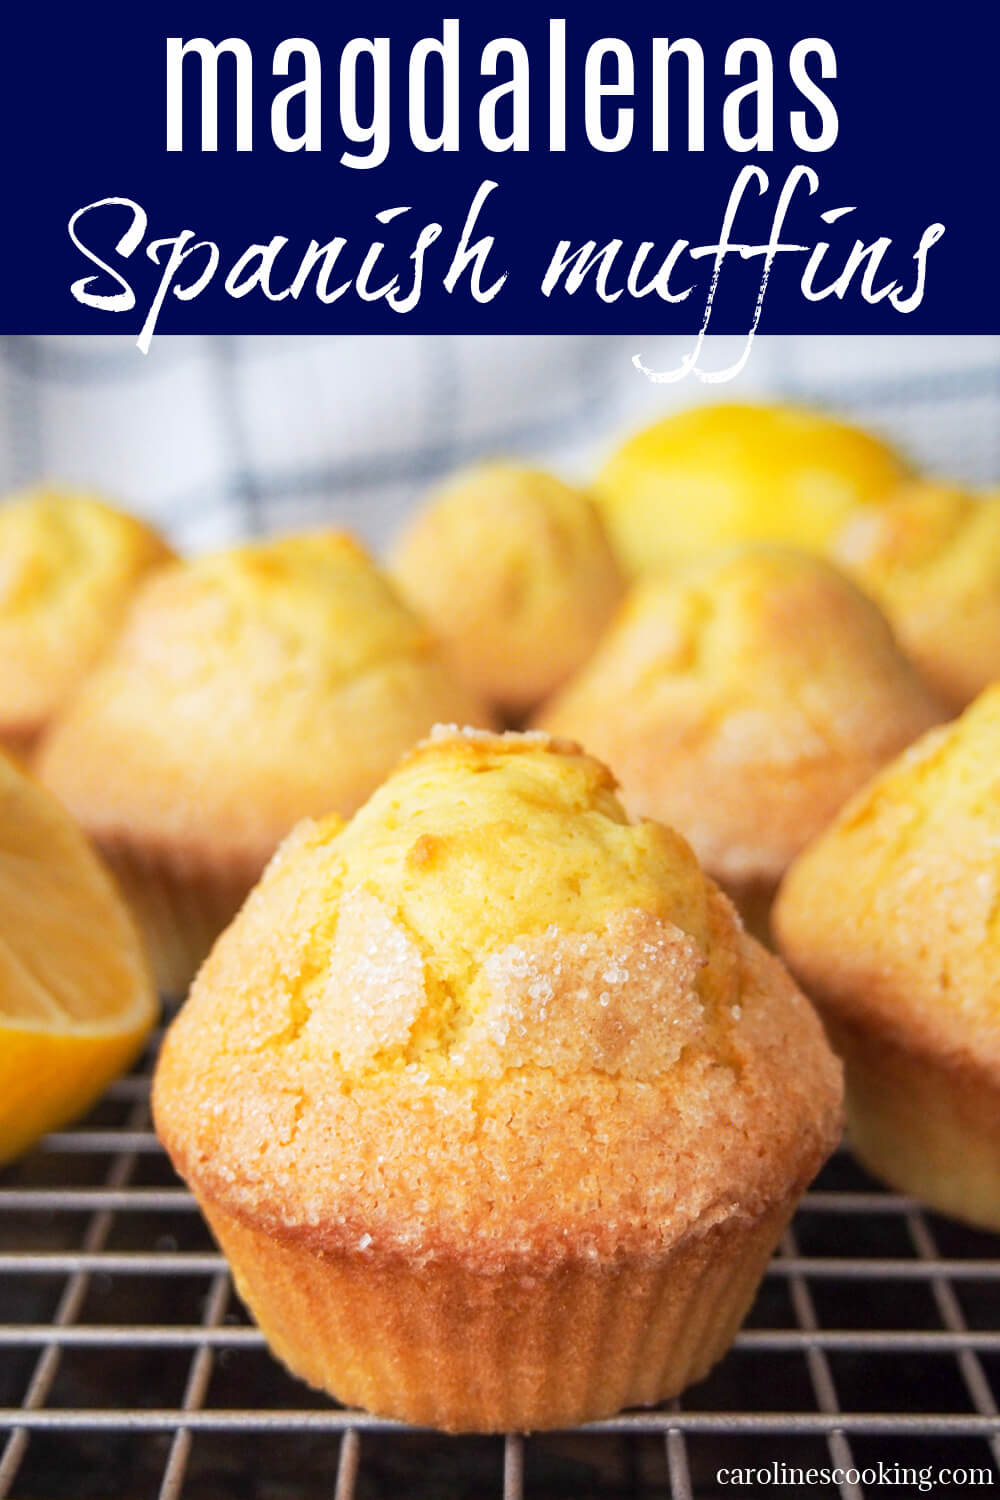 Magdalenas are Spanish lemon and olive oil muffins that you'll find in bakeries across the country.  They're easy to make at home, too, with only a few common ingredients.  They have a lovely delicate flavor, and are perfect still warm out the oven with coffee.